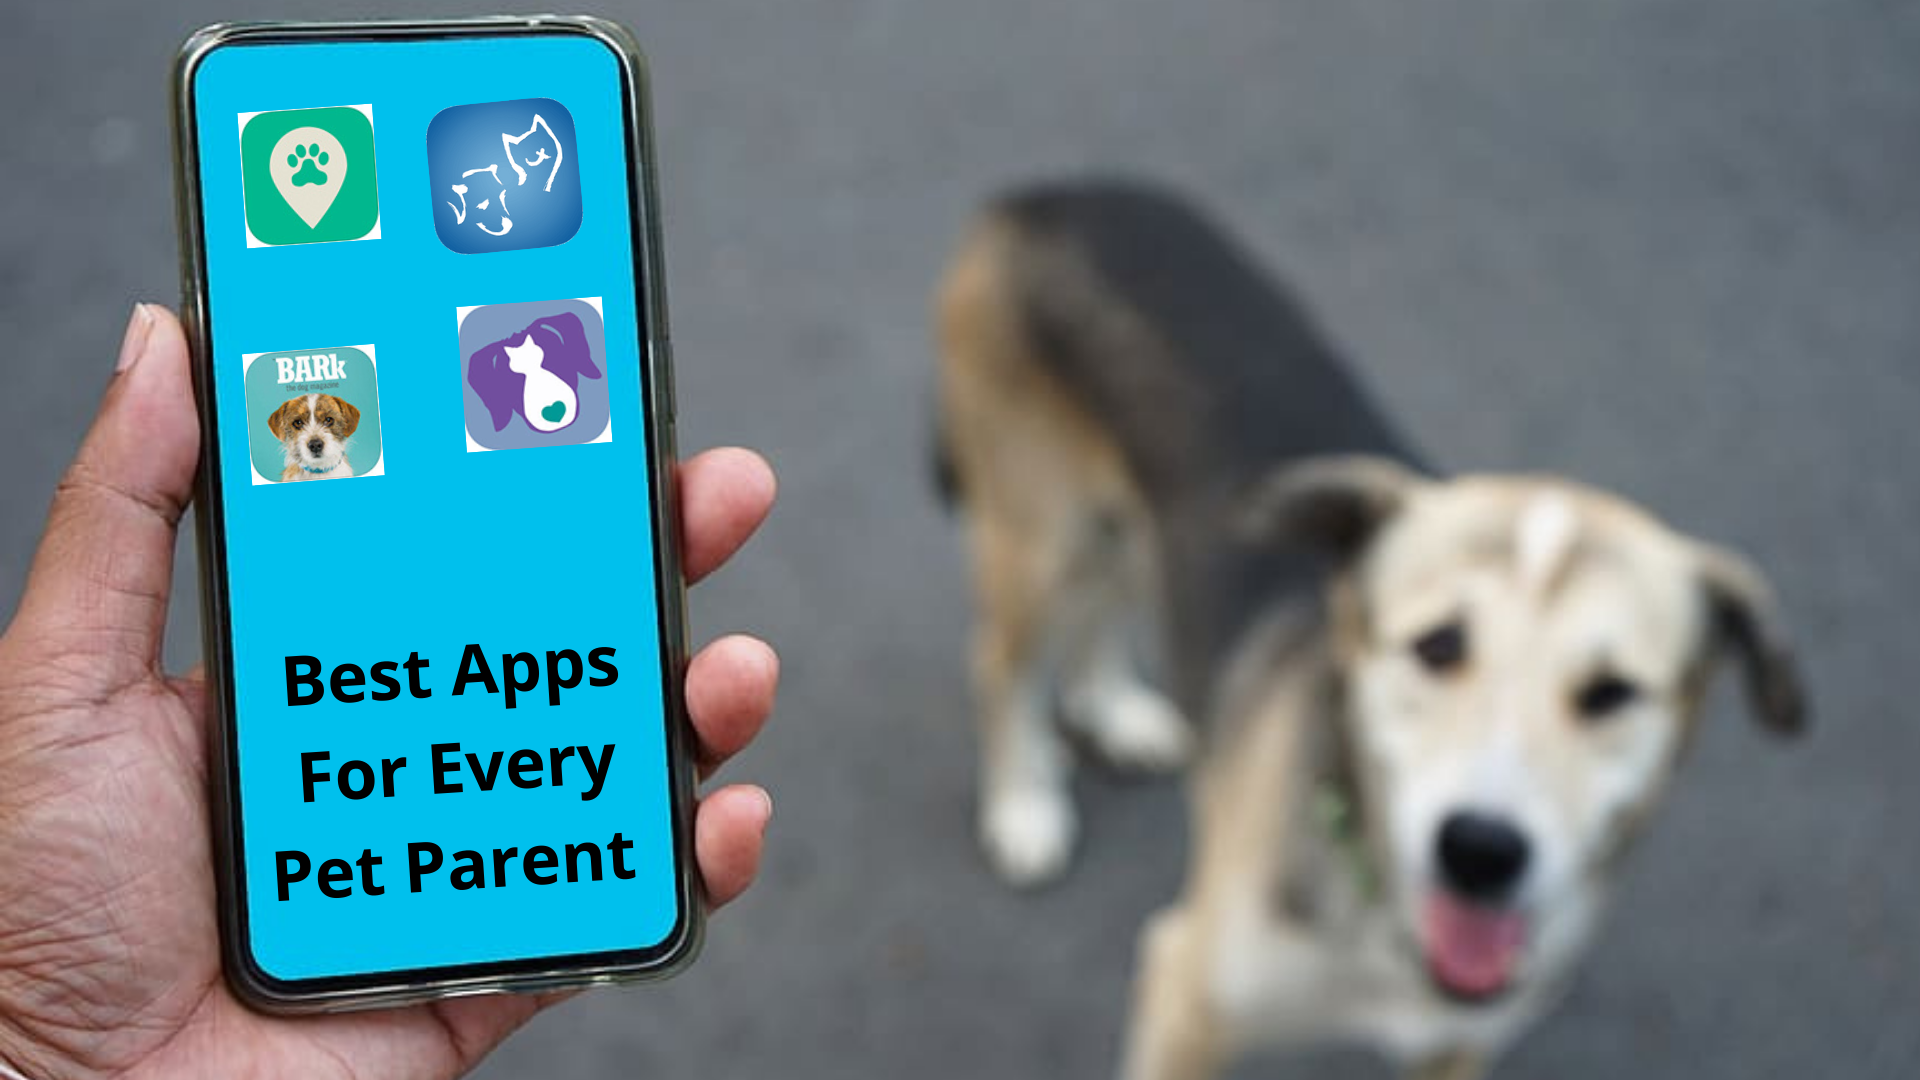 9 Best Apps For Every Pet Parent